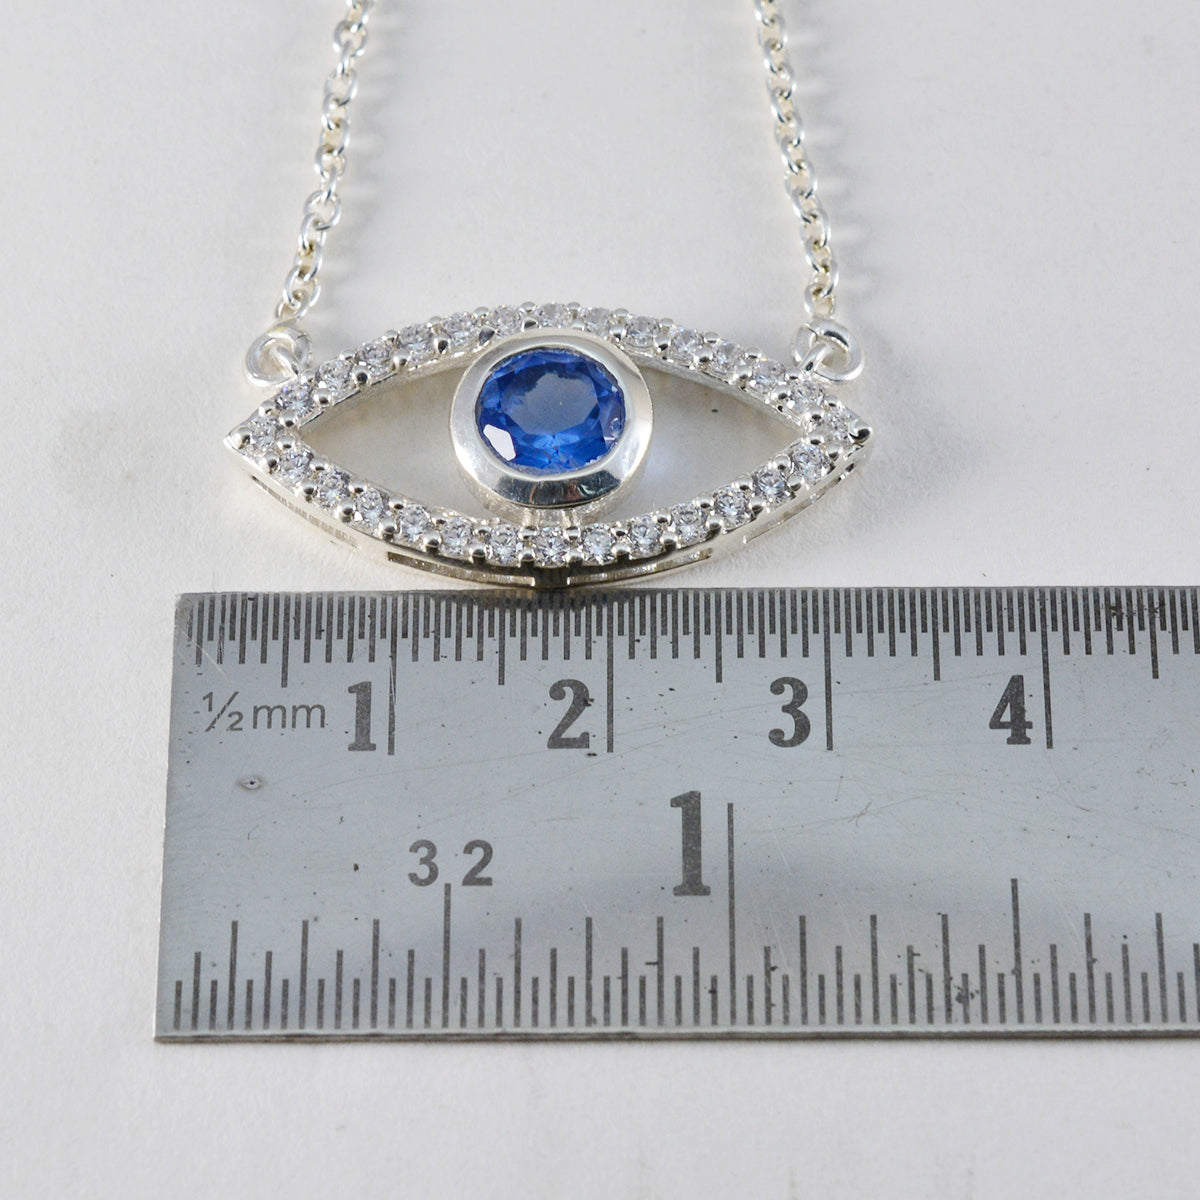 Riyo Fanciable Gemstone Round Faceted Blue Blue Sapphire Cz 1145 Sterling Silver Pendant Gift For Birthday